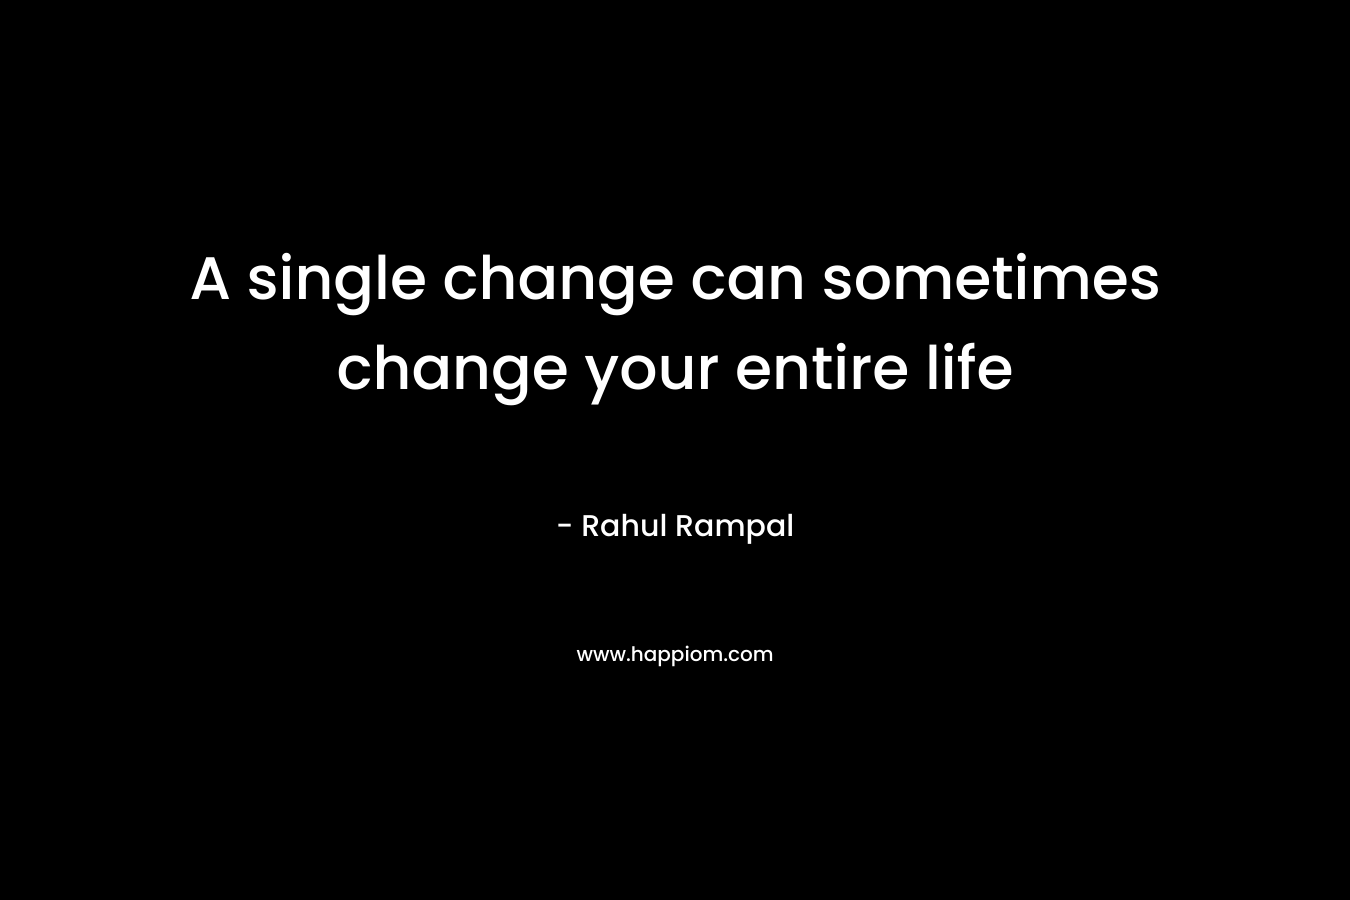 A single change can sometimes change your entire life – Rahul Rampal